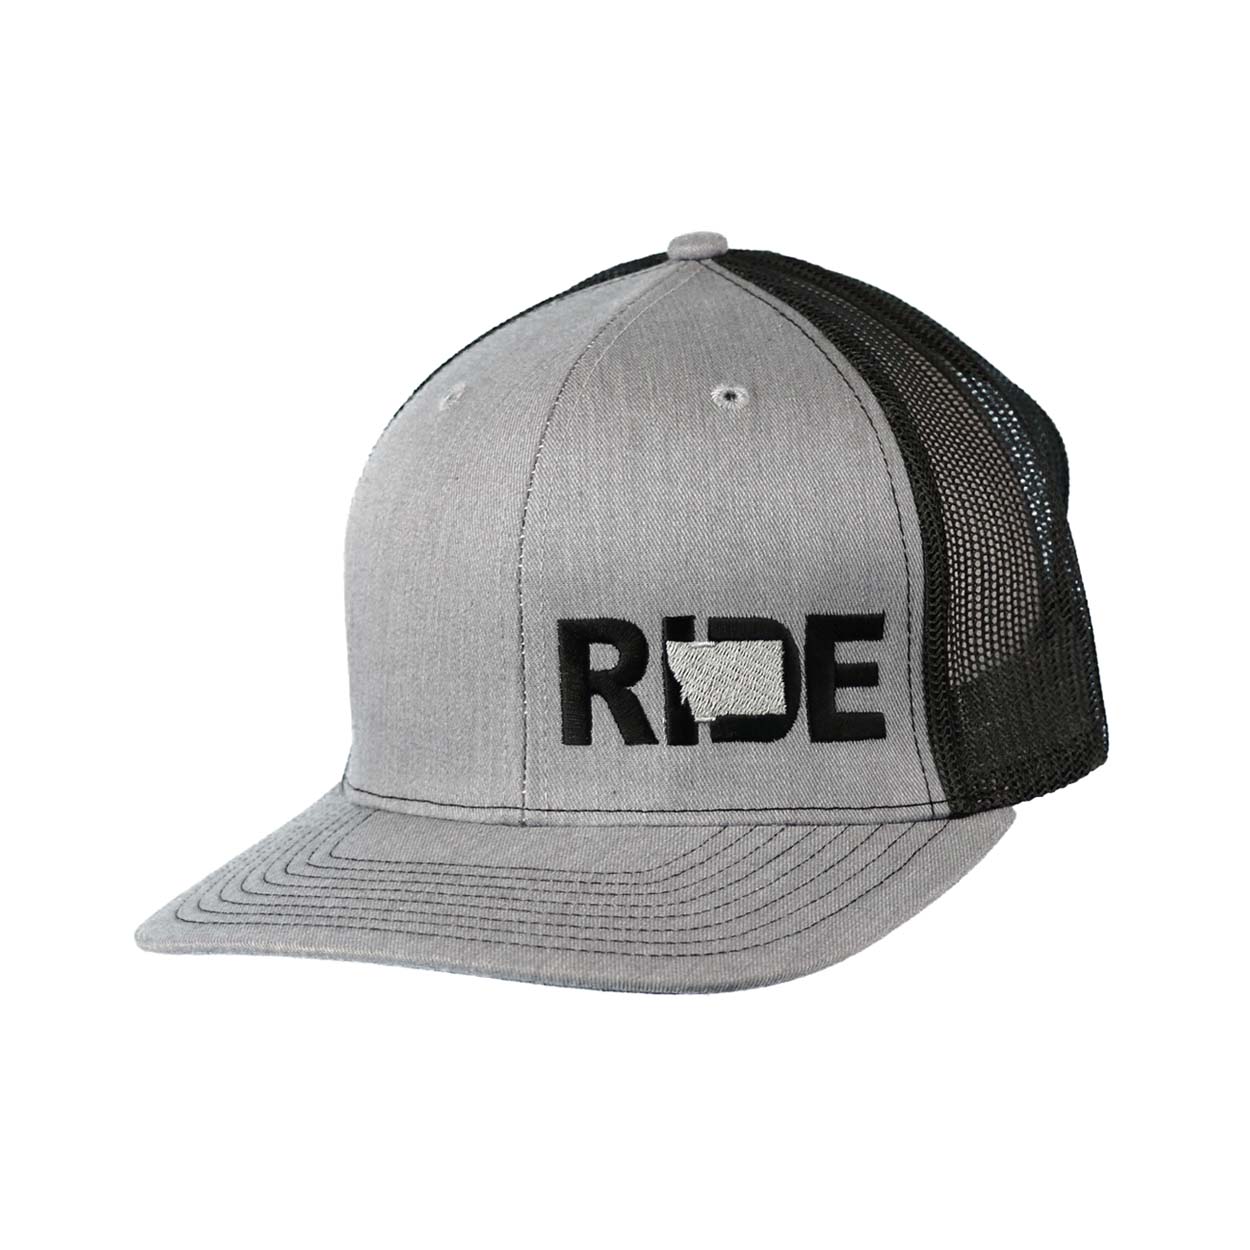 Ride Montana Night Out Embroidered Snapback Trucker Hat Heather Gray/Black